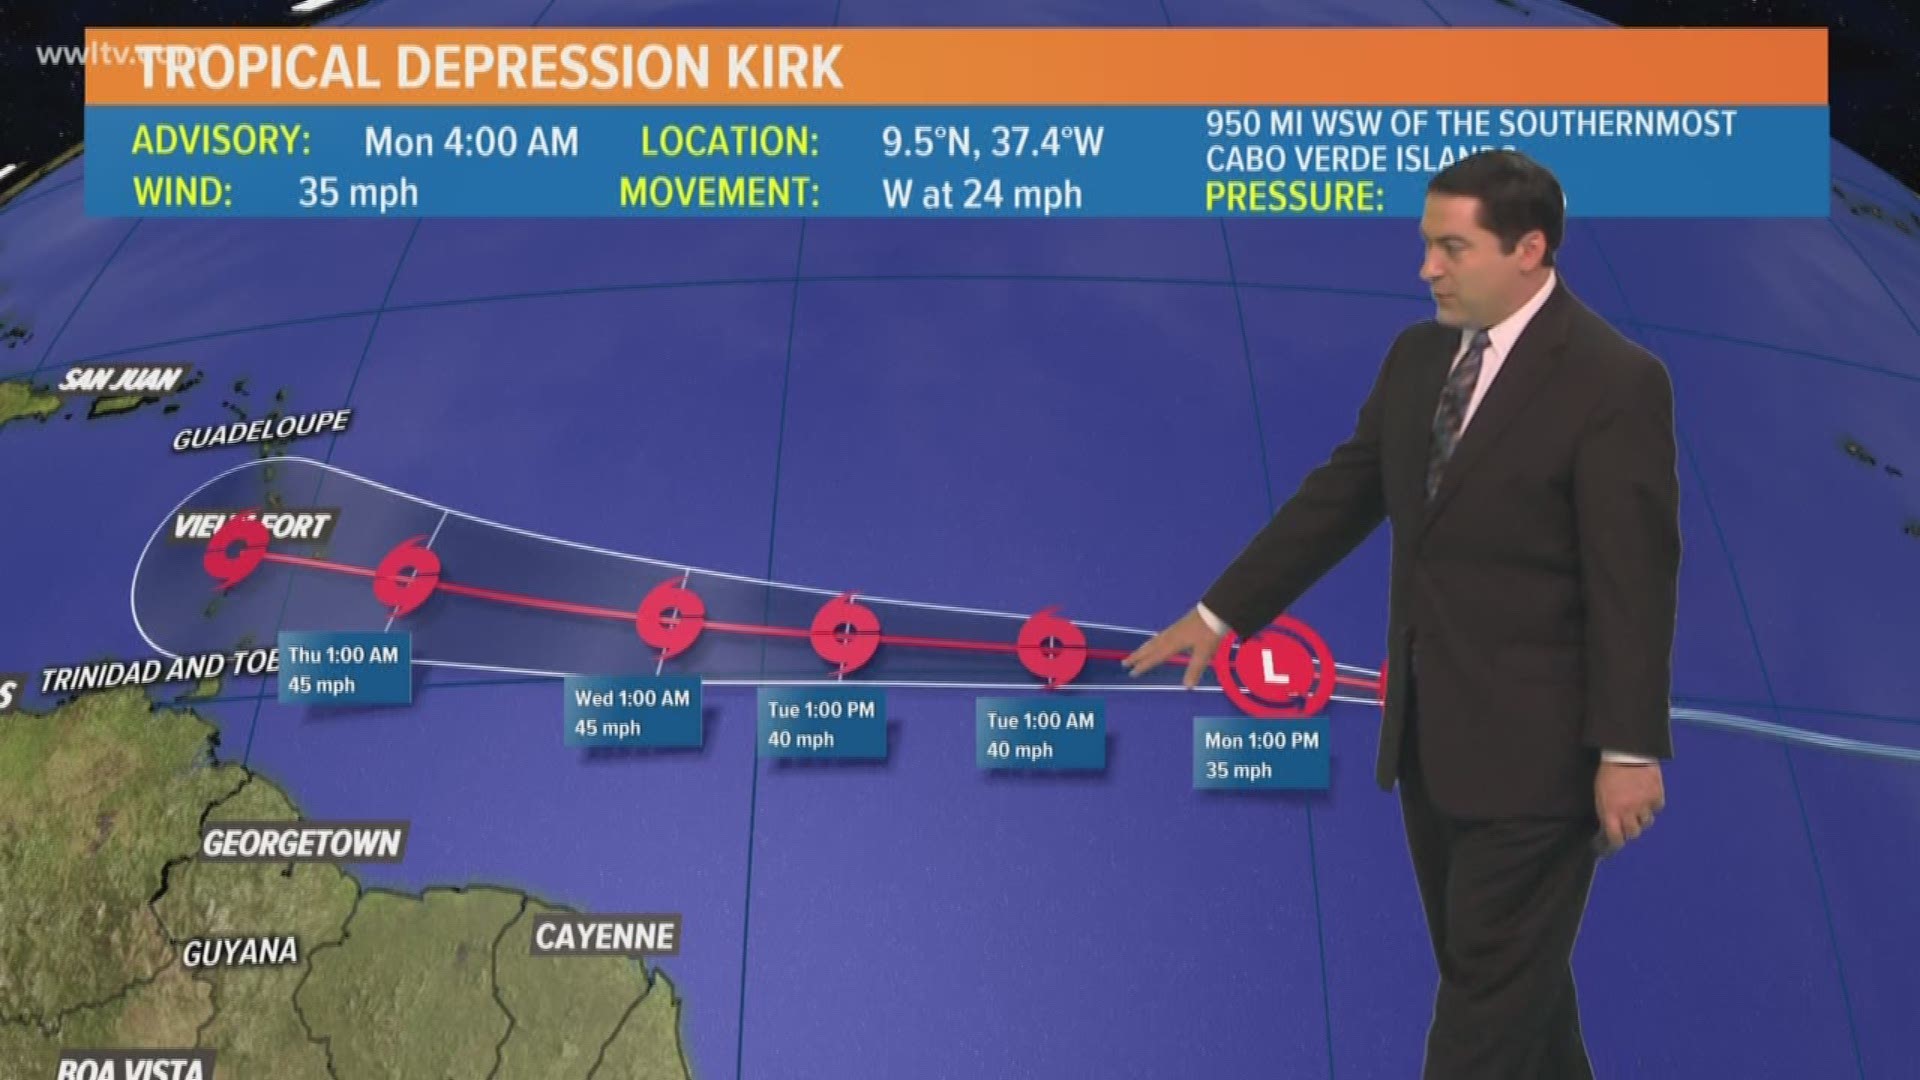 Kirk has weakened into a tropical depression as battles wind shear.  It sits not far off the African Coast at this time